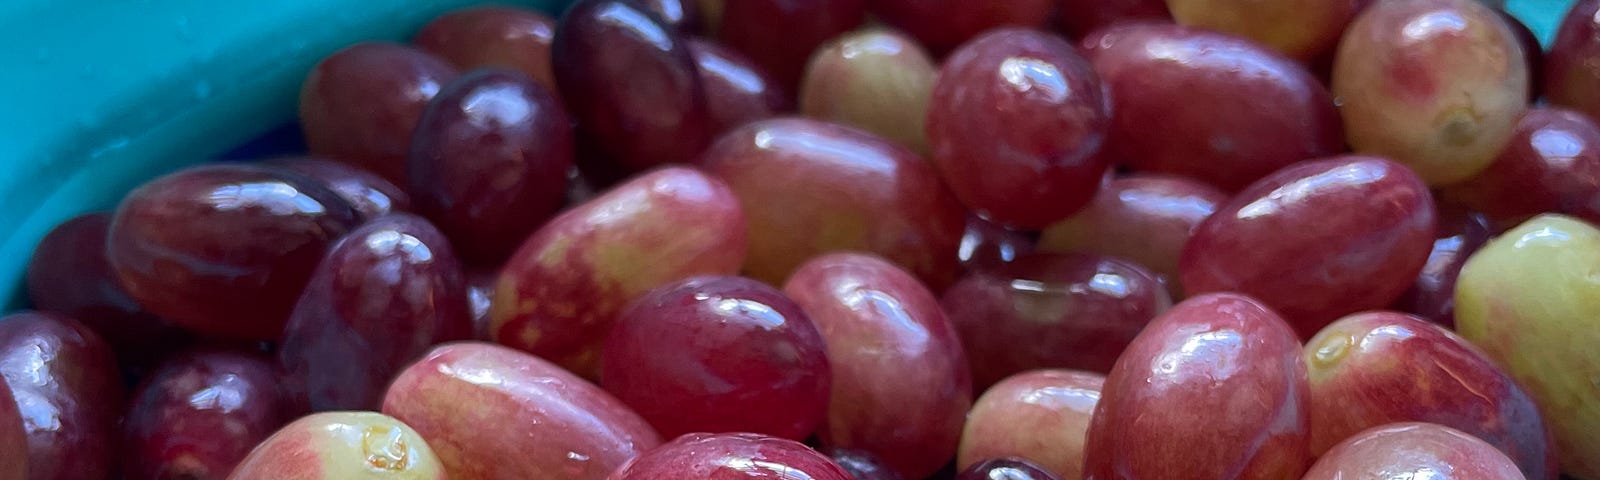 Fresh grapes being rinsed in a colander